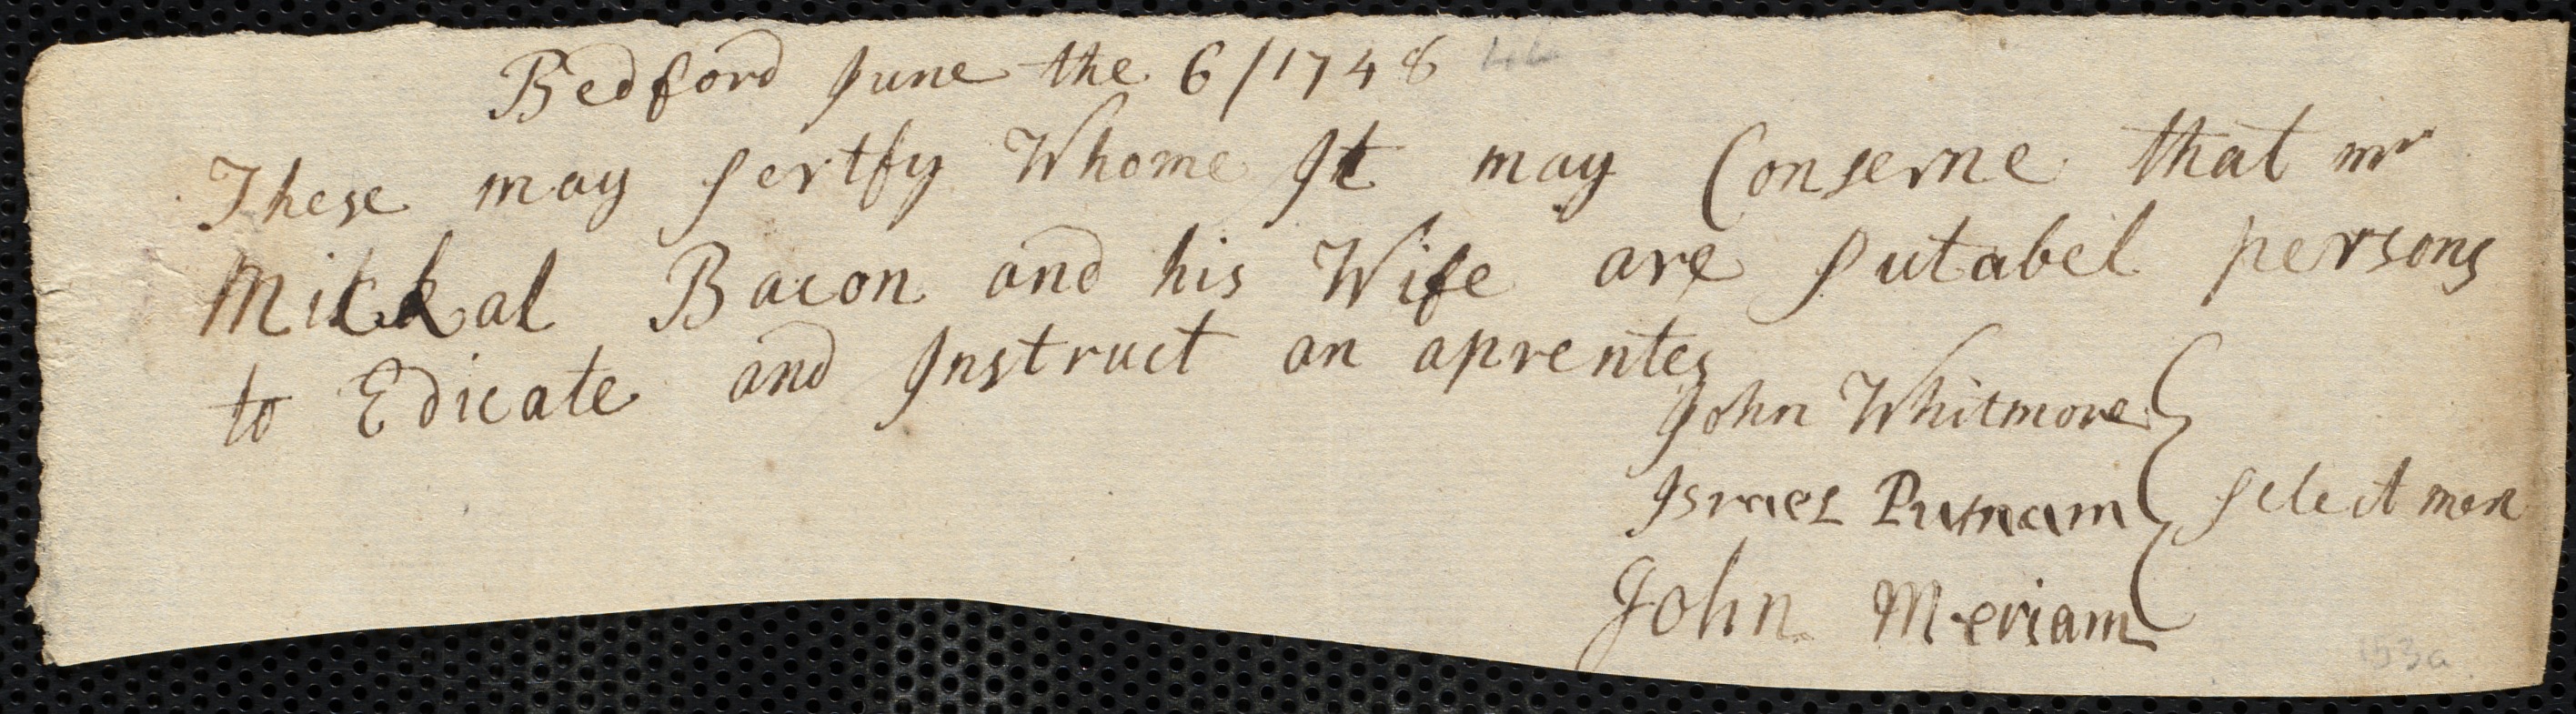 Martha Bennett indentured to apprentice with Michael Bacon of Bedford, 7 July 1748